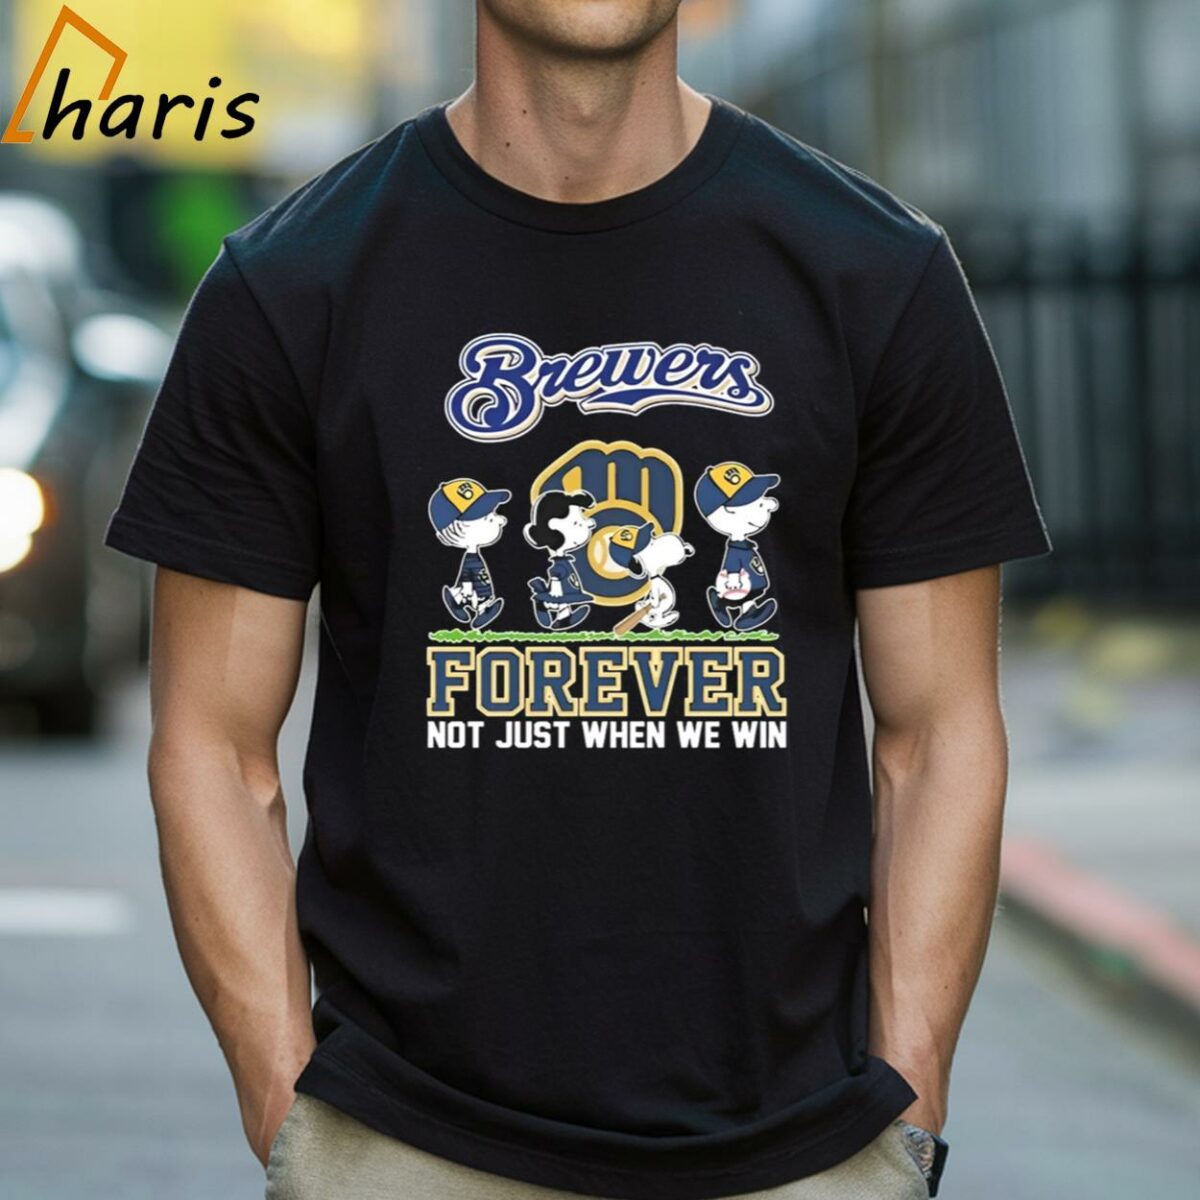 The Peanuts Movie Characters Milwaukee Brewers Abbey Road Forever Not Just When We Win Shirt 1 Shirt